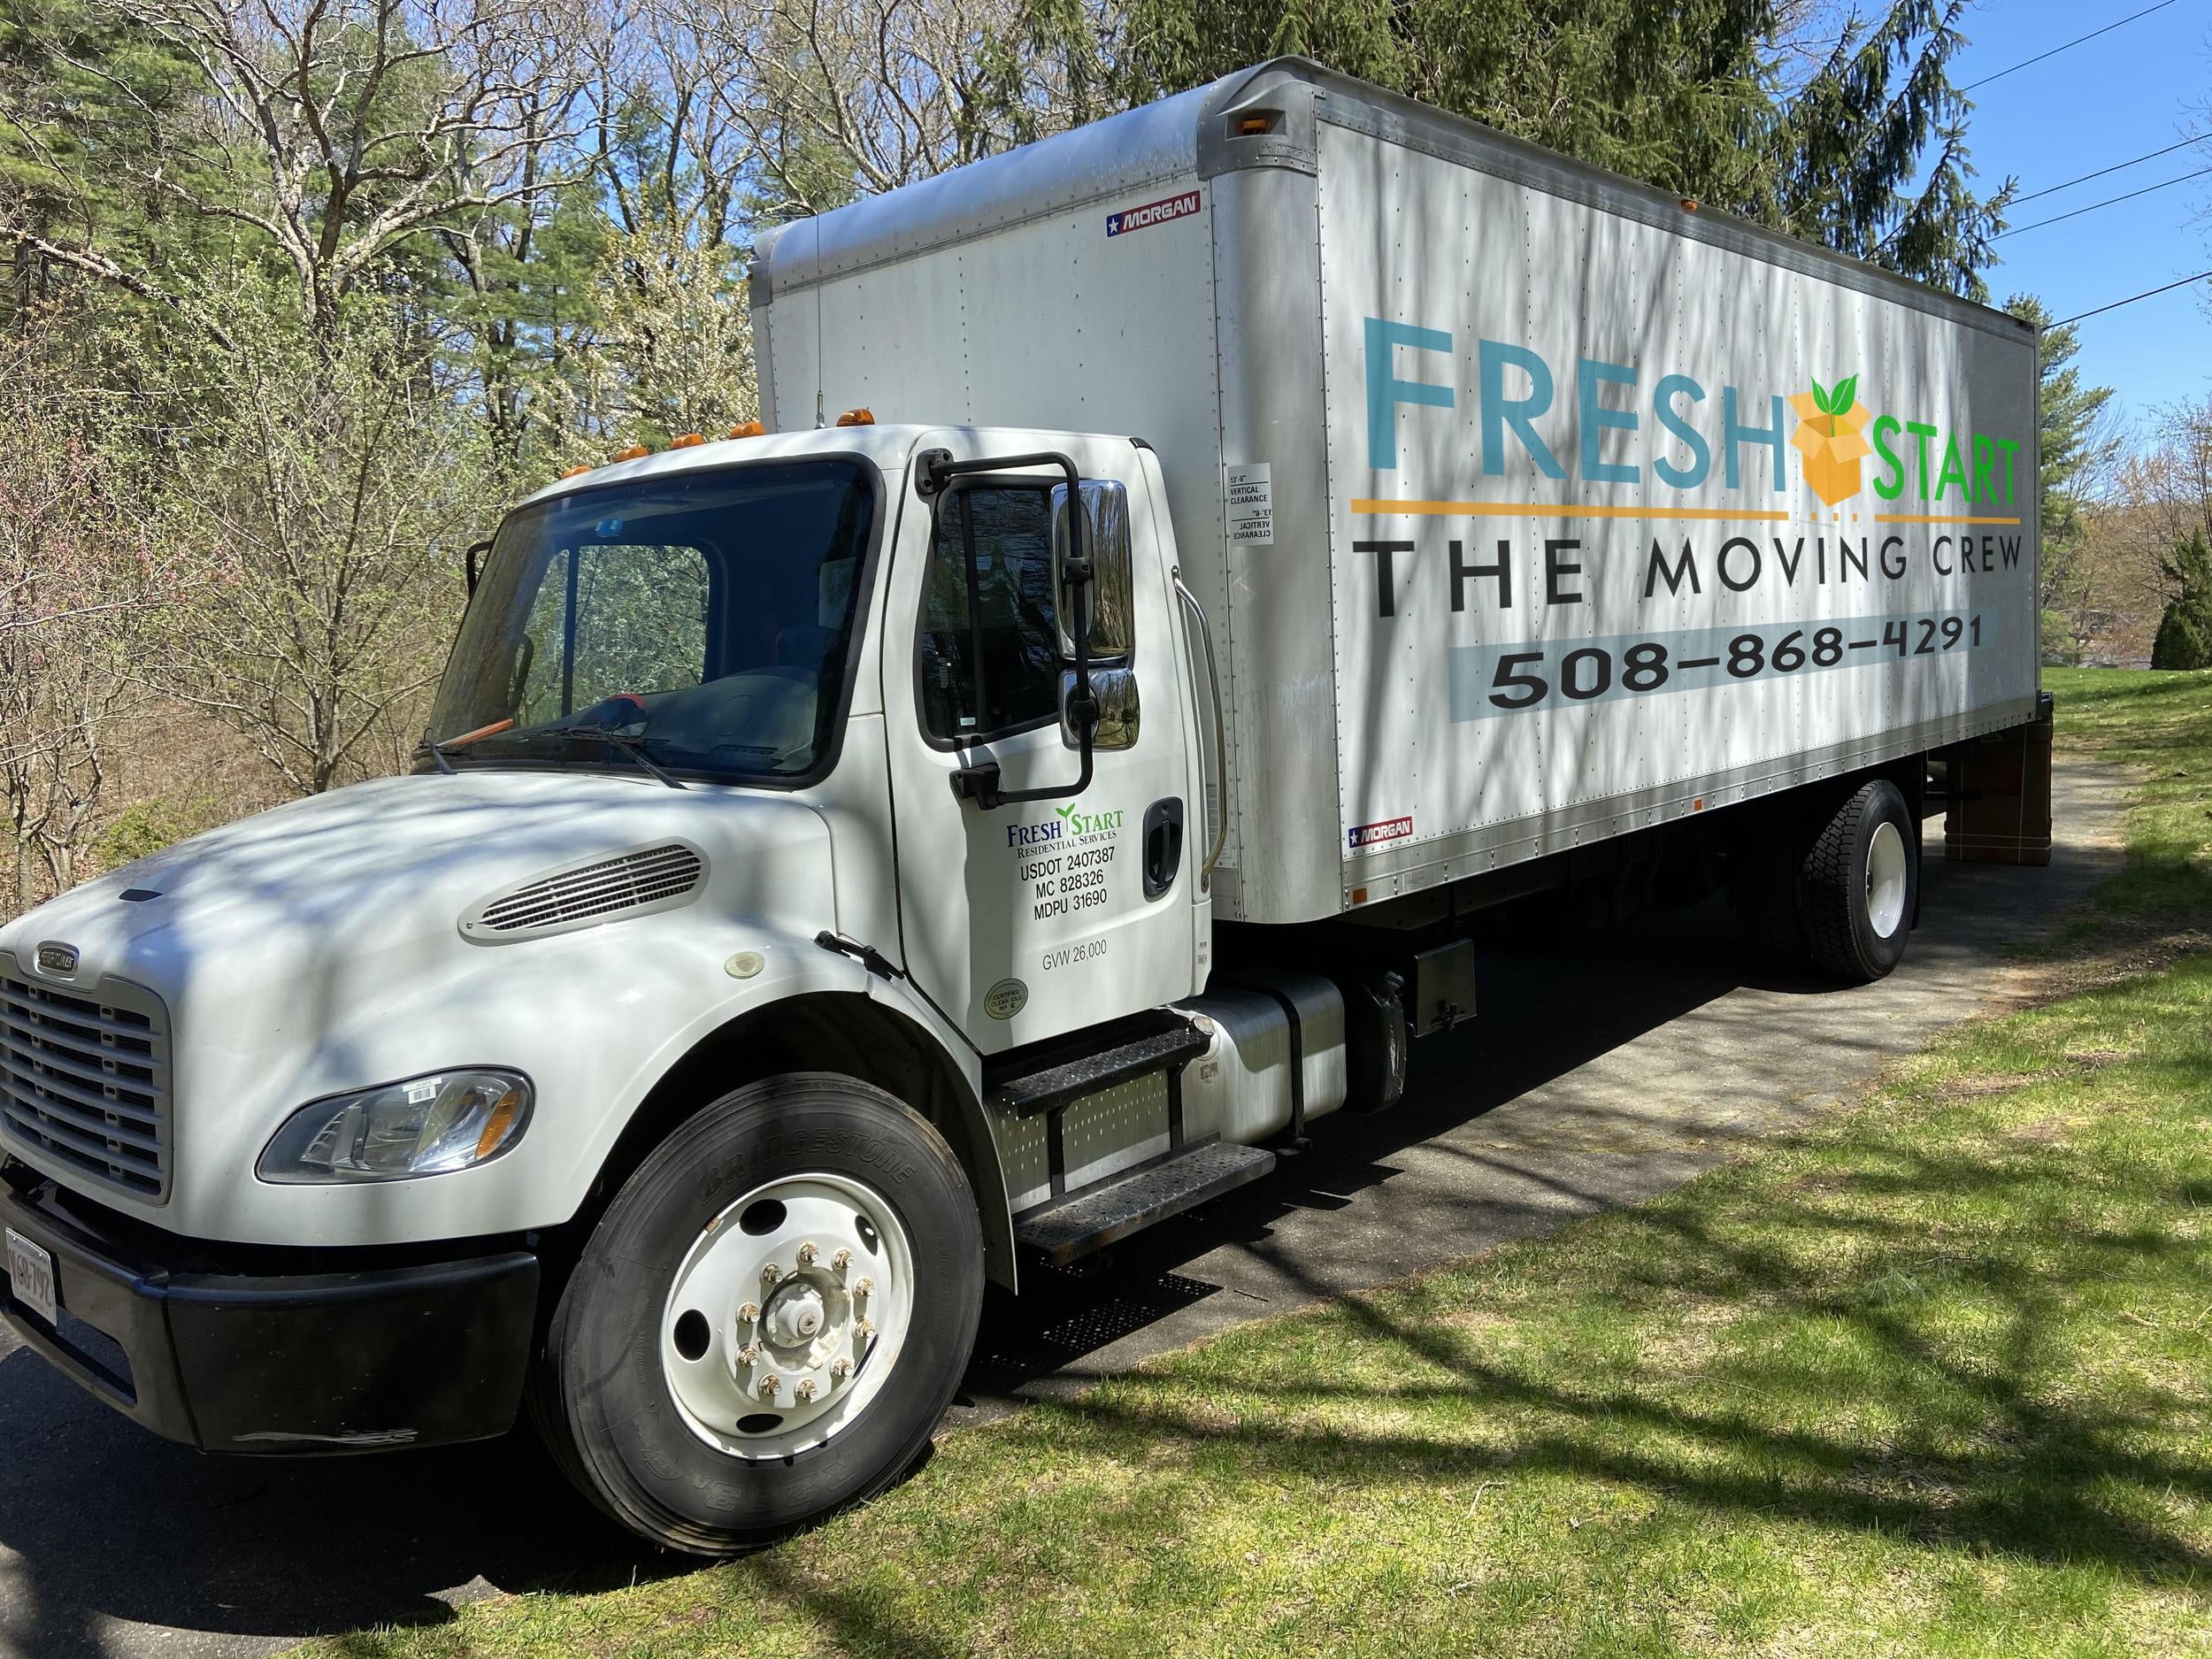 Friendly and professional movers for your couch in Central MA